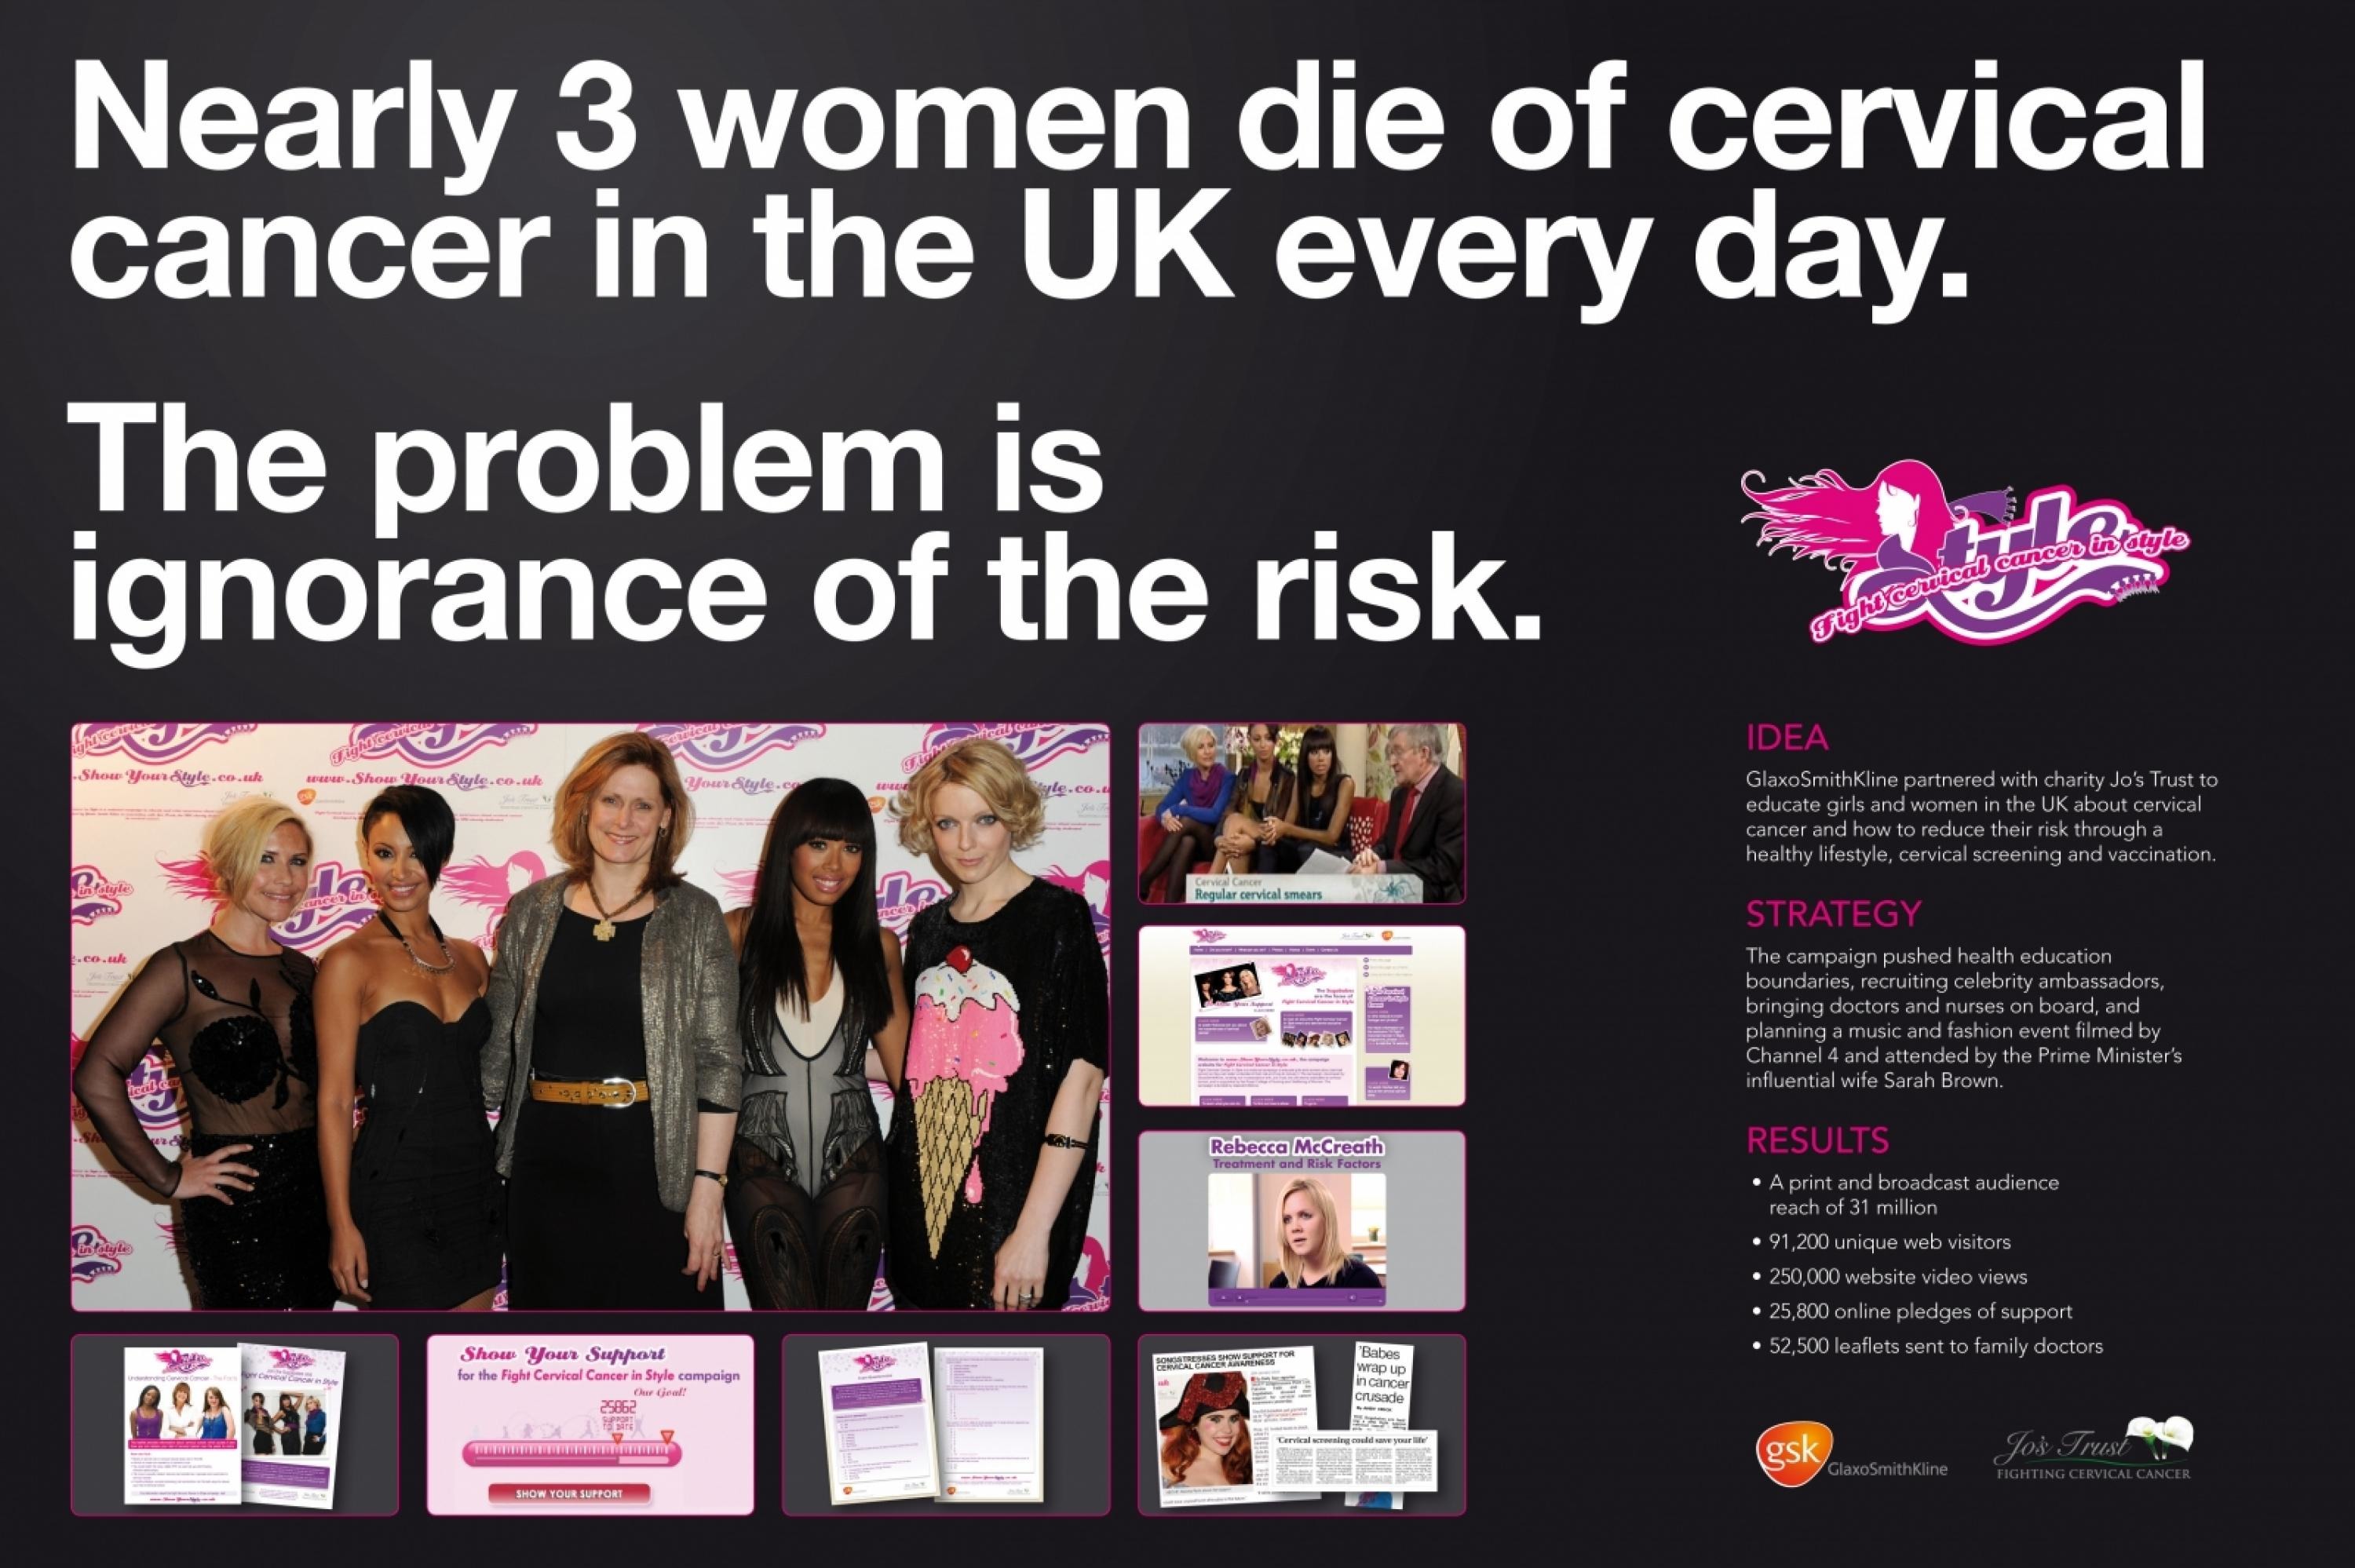 FIGHT CERVICAL CANCER IN STYLE